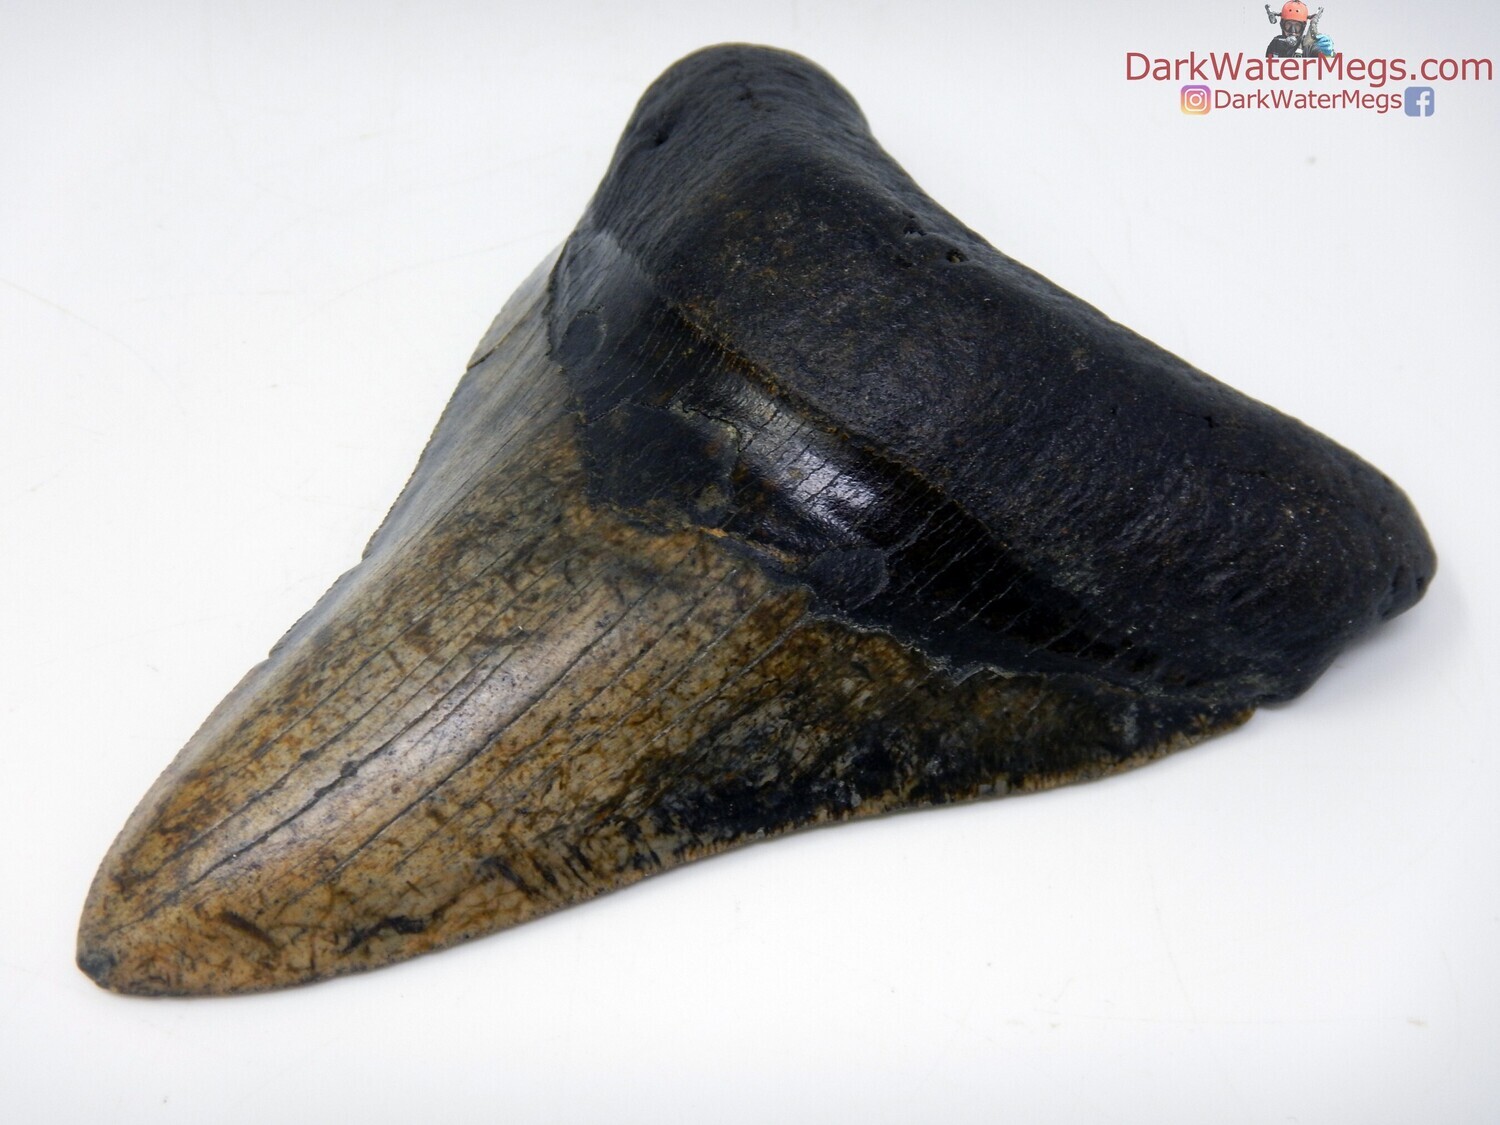 4.95" wildly patterned megalodon